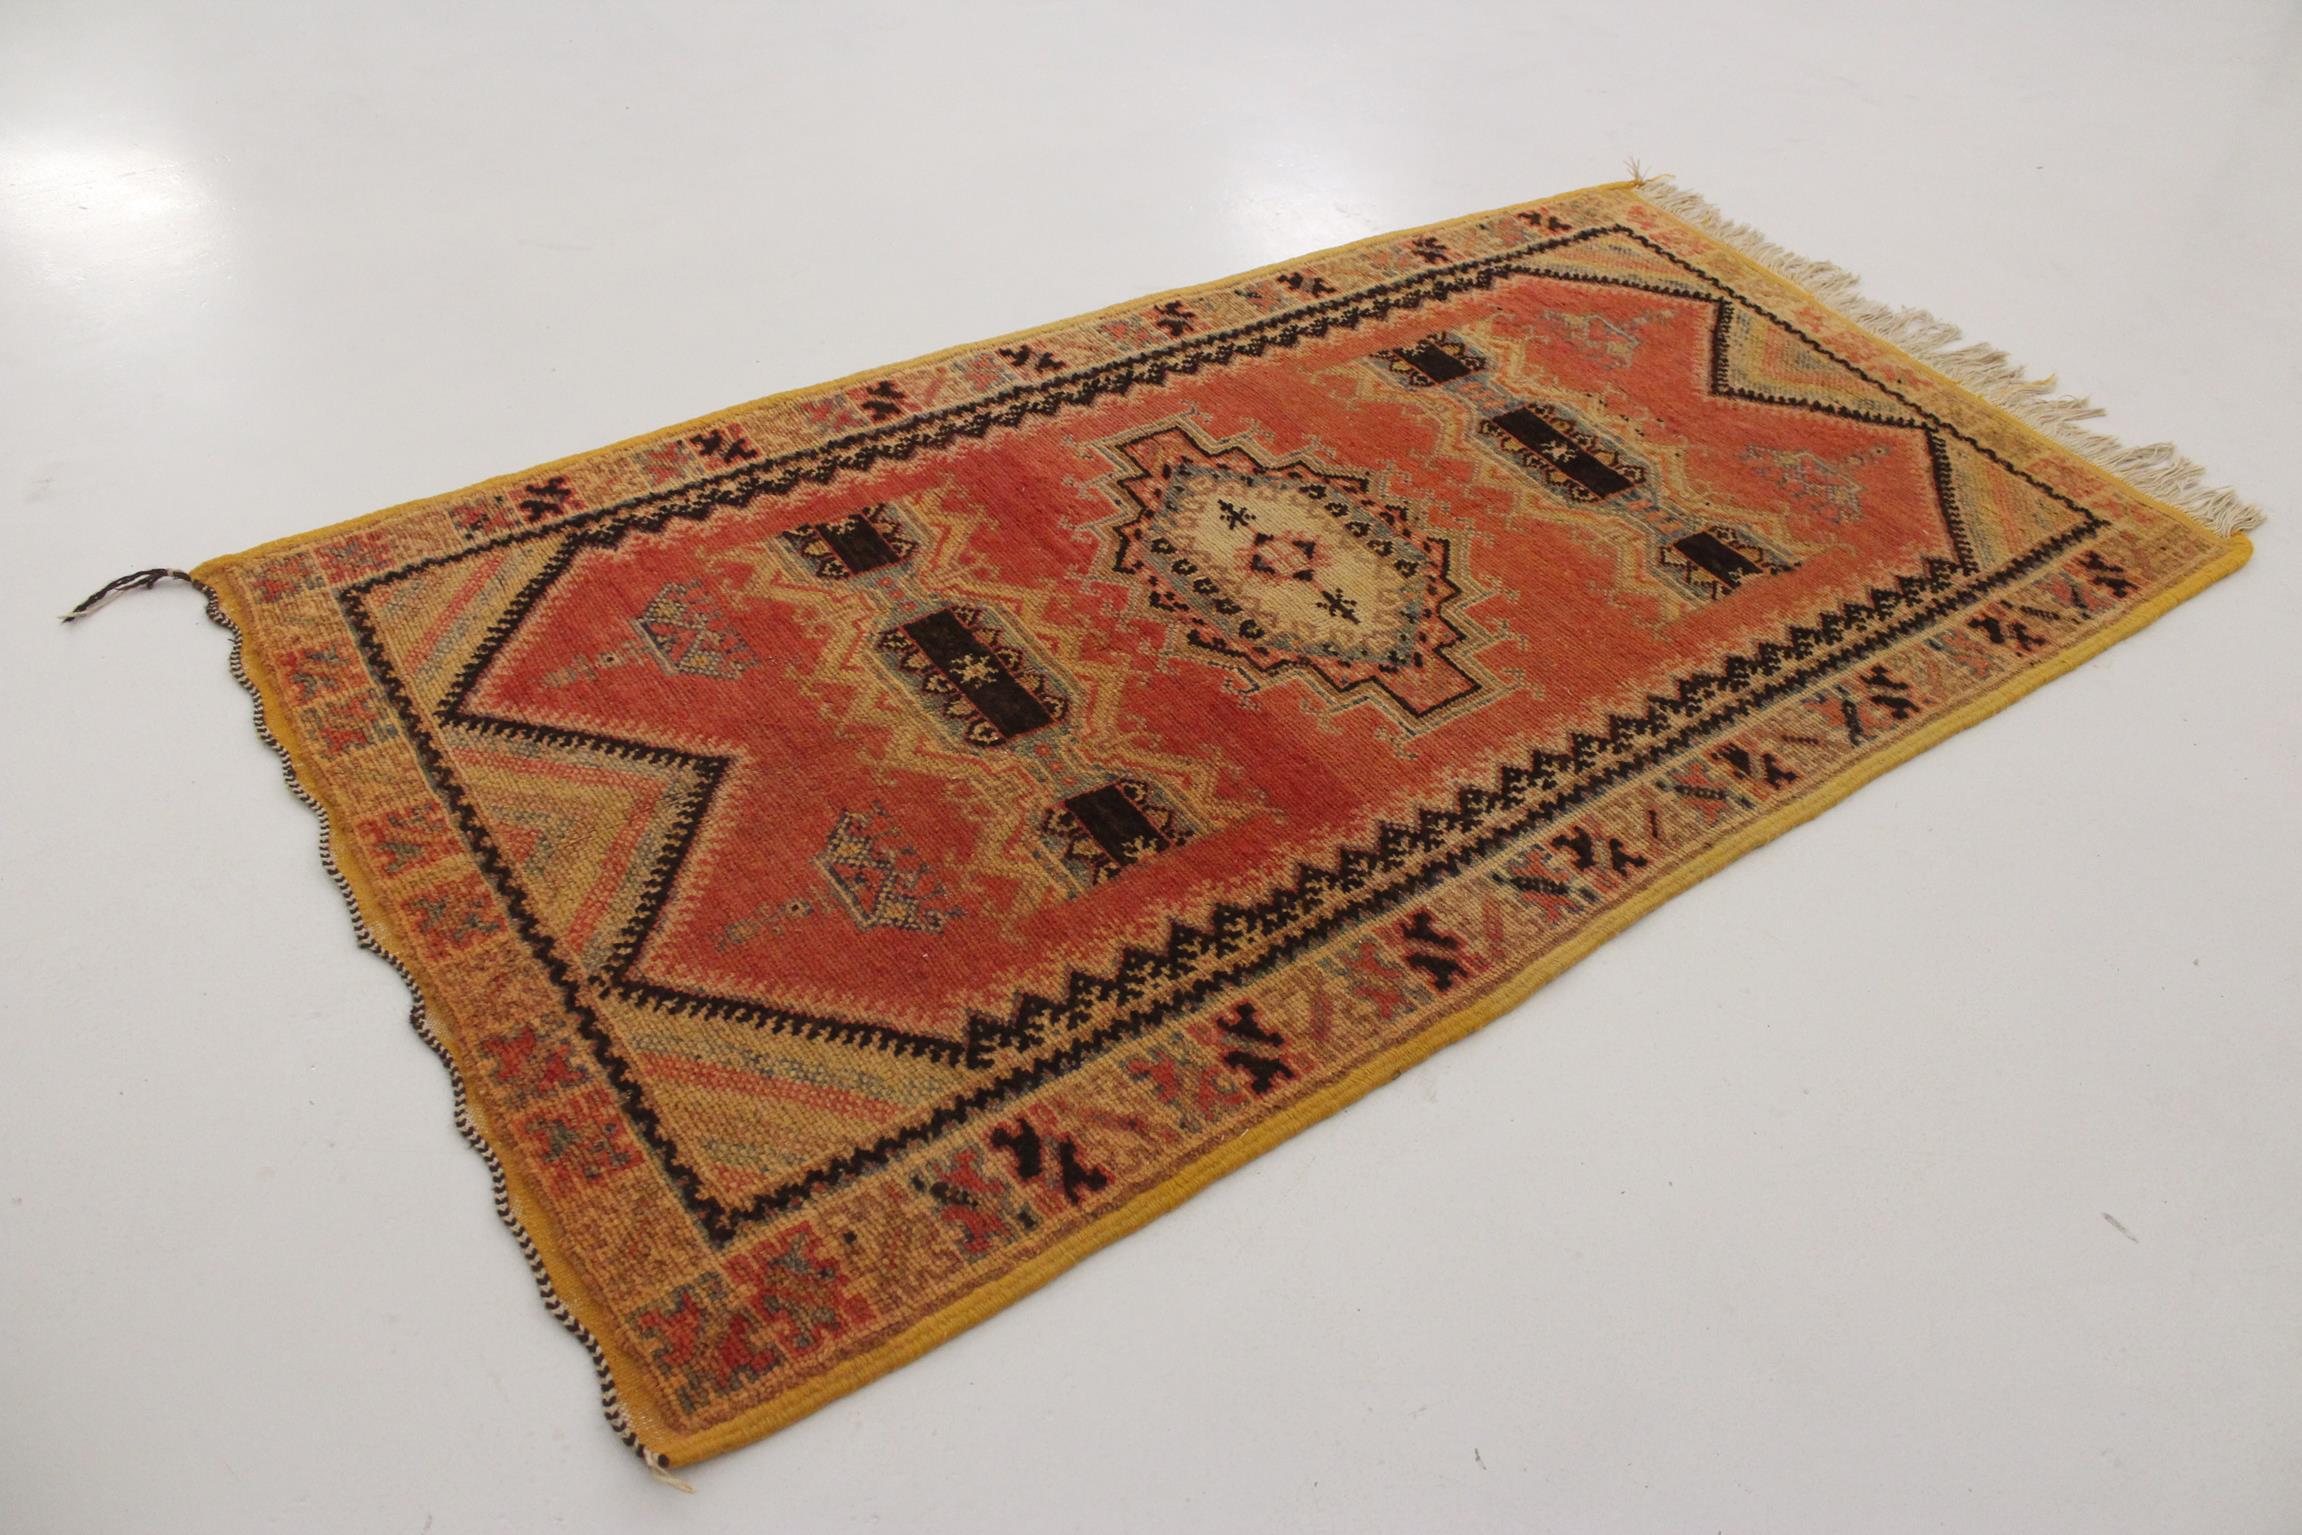 Vintage Moroccan Taznakht rug - Blood orange/black - 3.2x5.8feet / 100x178cm In Good Condition For Sale In Marrakech, MA